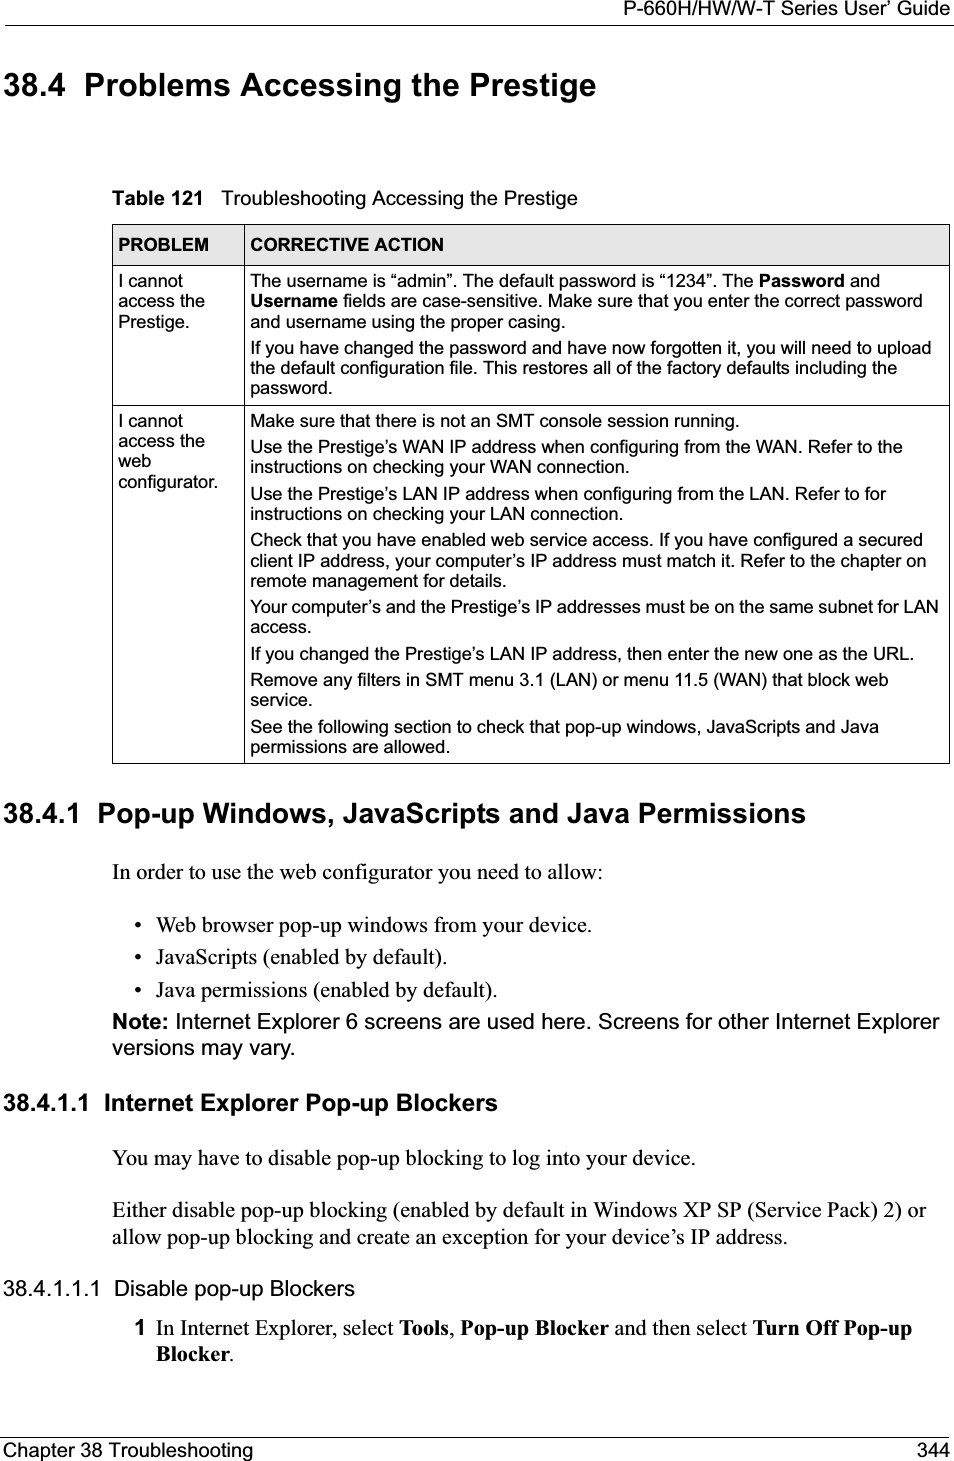 P-660H/HW/W-T Series User’ GuideChapter 38 Troubleshooting 34438.4  Problems Accessing the Prestige38.4.1  Pop-up Windows, JavaScripts and Java Permissions In order to use the web configurator you need to allow:• Web browser pop-up windows from your device.• JavaScripts (enabled by default).• Java permissions (enabled by default).Note: Internet Explorer 6 screens are used here. Screens for other Internet Explorer versions may vary.38.4.1.1  Internet Explorer Pop-up BlockersYou may have to disable pop-up blocking to log into your device. Either disable pop-up blocking (enabled by default in Windows XP SP (Service Pack) 2) or allow pop-up blocking and create an exception for your device’s IP address.38.4.1.1.1  Disable pop-up Blockers1In Internet Explorer, select Tools,Pop-up Blocker and then select Turn Off Pop-up Blocker.Table 121   Troubleshooting Accessing the PrestigePROBLEM CORRECTIVE ACTIONI cannot access the Prestige.The username is “admin”. The default password is “1234”. The Password and Username fields are case-sensitive. Make sure that you enter the correct password and username using the proper casing.If you have changed the password and have now forgotten it, you will need to upload the default configuration file. This restores all of the factory defaults including the password.I cannot access the web configurator.Make sure that there is not an SMT console session running.Use the Prestige’s WAN IP address when configuring from the WAN. Refer to the instructions on checking your WAN connection.Use the Prestige’s LAN IP address when configuring from the LAN. Refer to for instructions on checking your LAN connection.Check that you have enabled web service access. If you have configured a secured client IP address, your computer’s IP address must match it. Refer to the chapter on remote management for details. Your computer’s and the Prestige’s IP addresses must be on the same subnet for LAN access.If you changed the Prestige’s LAN IP address, then enter the new one as the URL.Remove any filters in SMT menu 3.1 (LAN) or menu 11.5 (WAN) that block web service. See the following section to check that pop-up windows, JavaScripts and Java permissions are allowed.